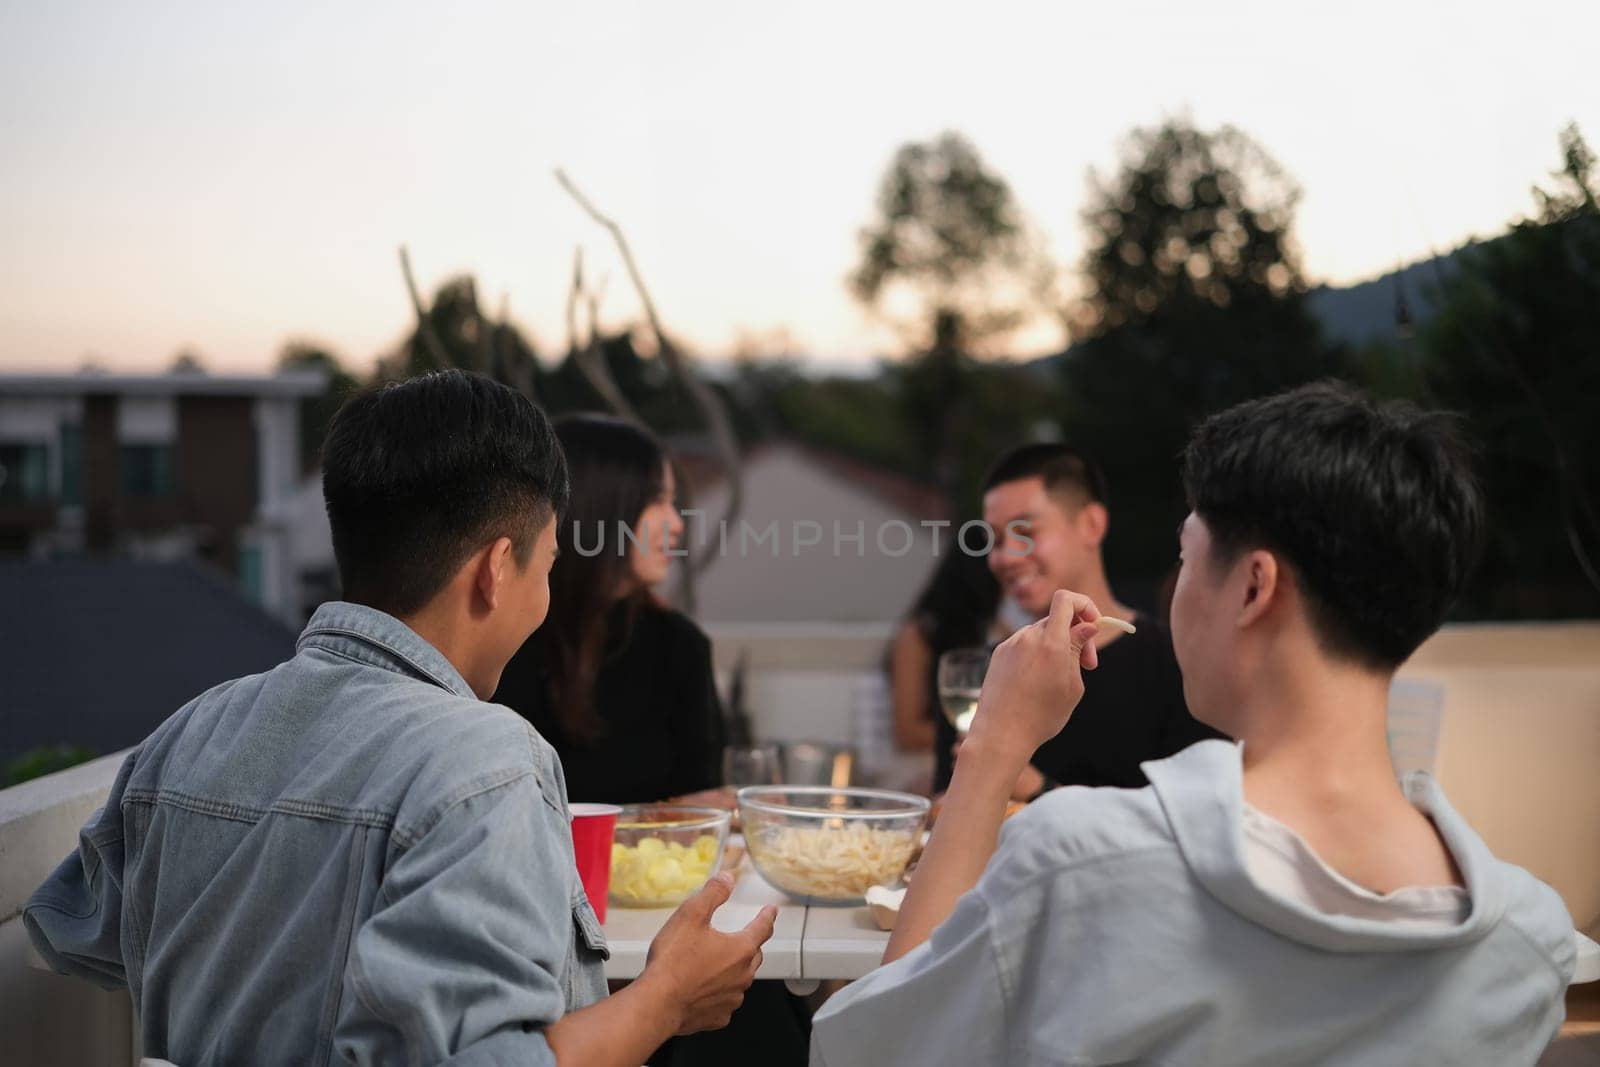 Rear view of young people enjoying conversation at rooftop party in evening.